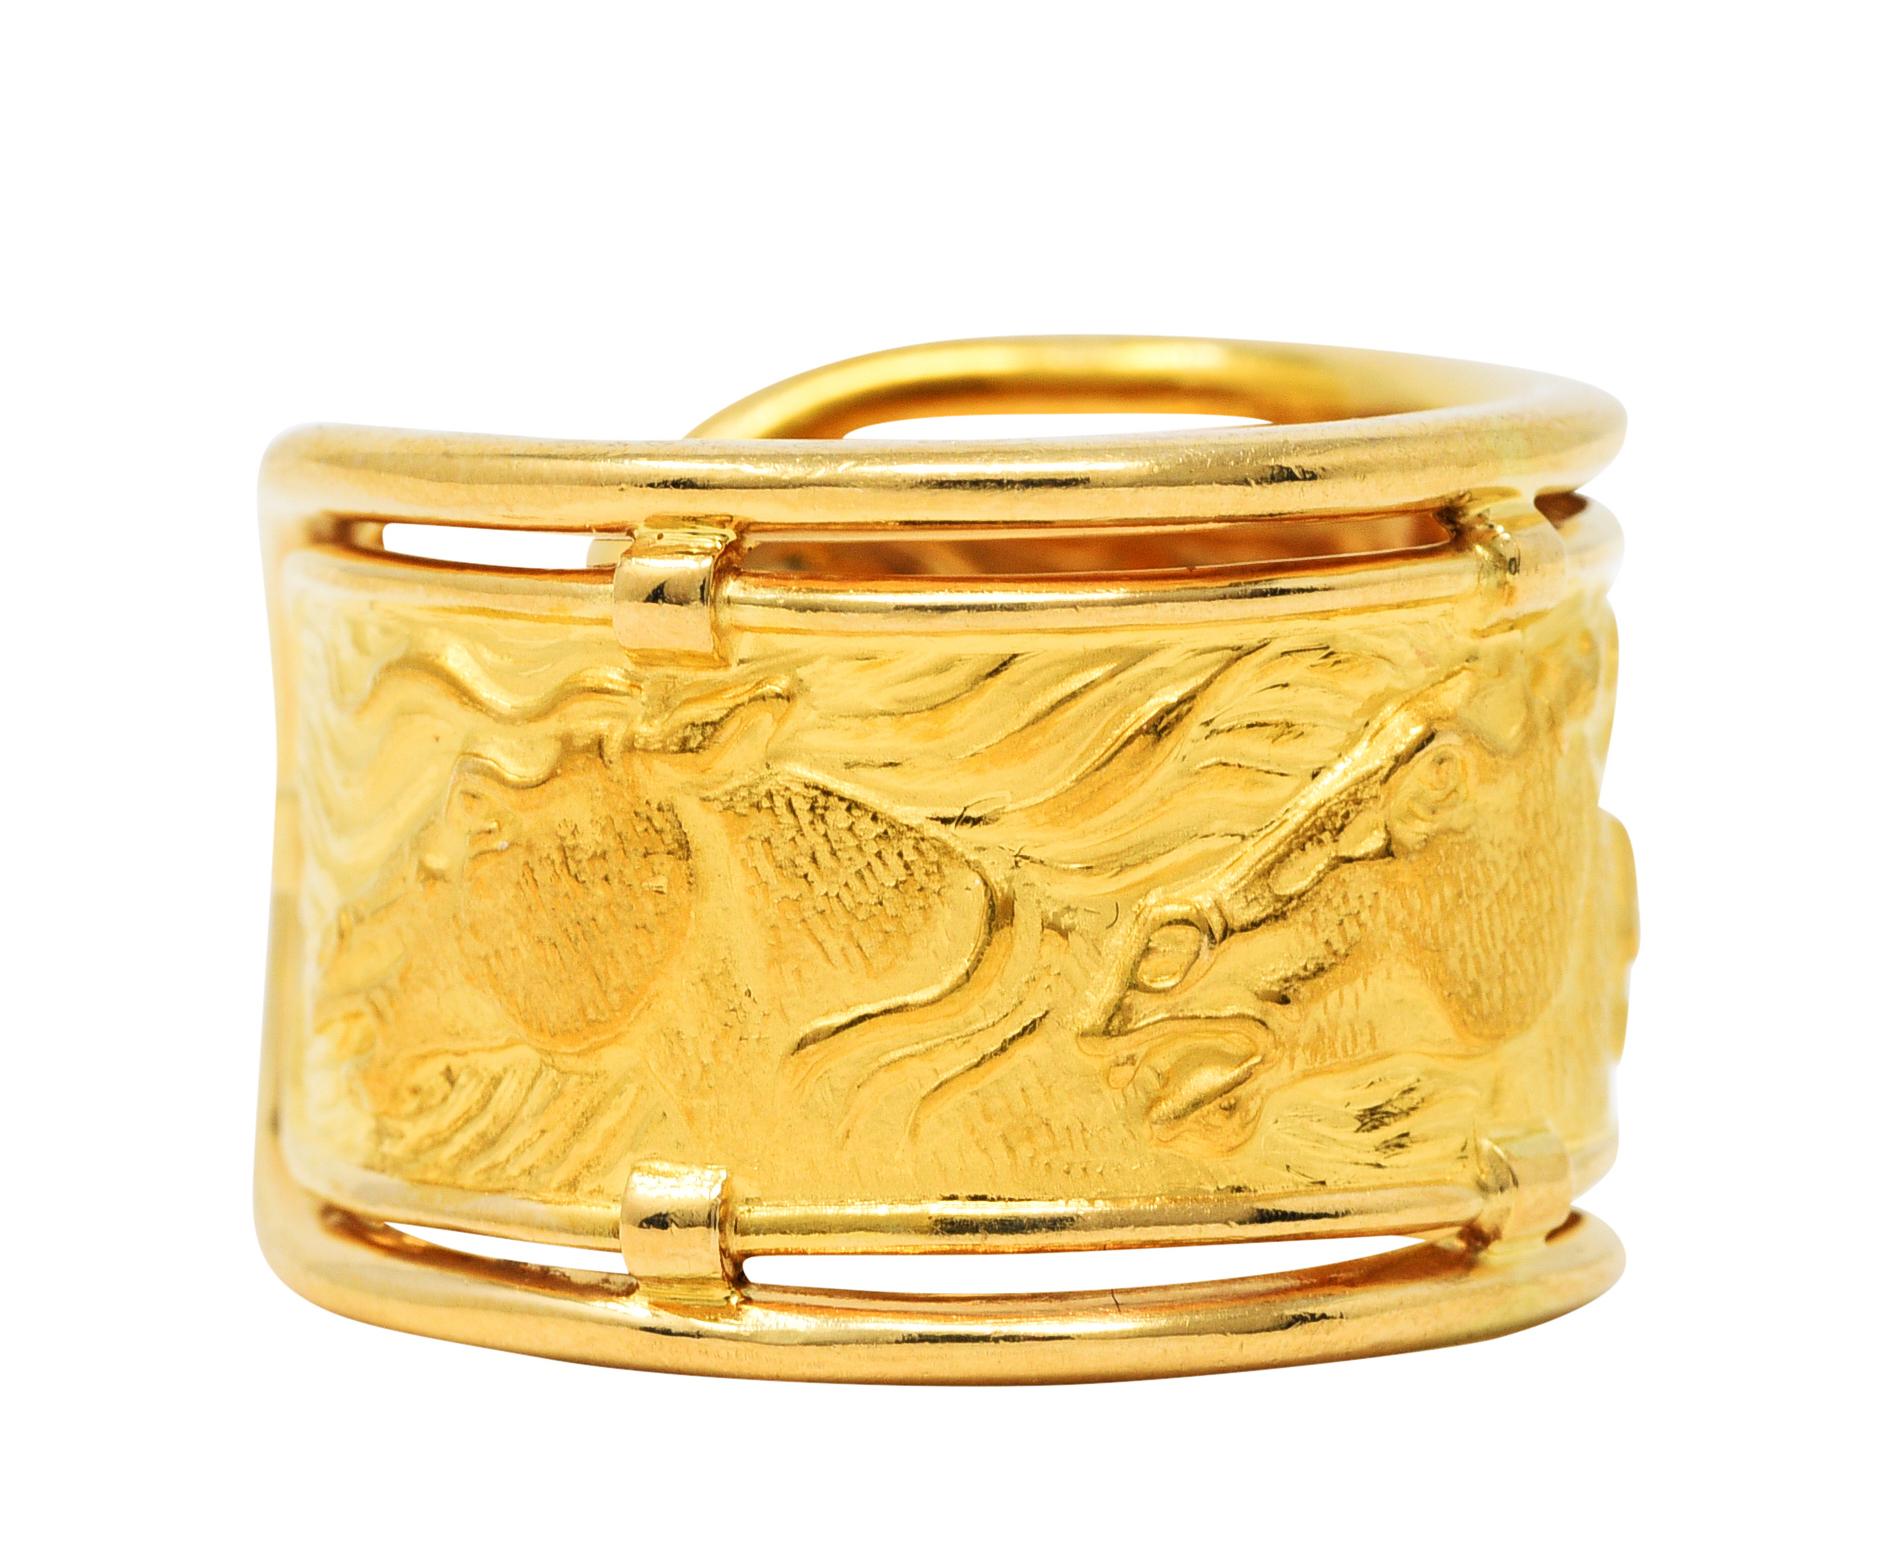 Cuff style repousse ring depicting horse heads with flowing manes

Featuring brushed gold texture

With high polished gold wire frame

Stamped 750 for 18 karat gold

With maker's mark for Carrera y Carrera

Ring Size: 6 1/2 and not sizable

Measure